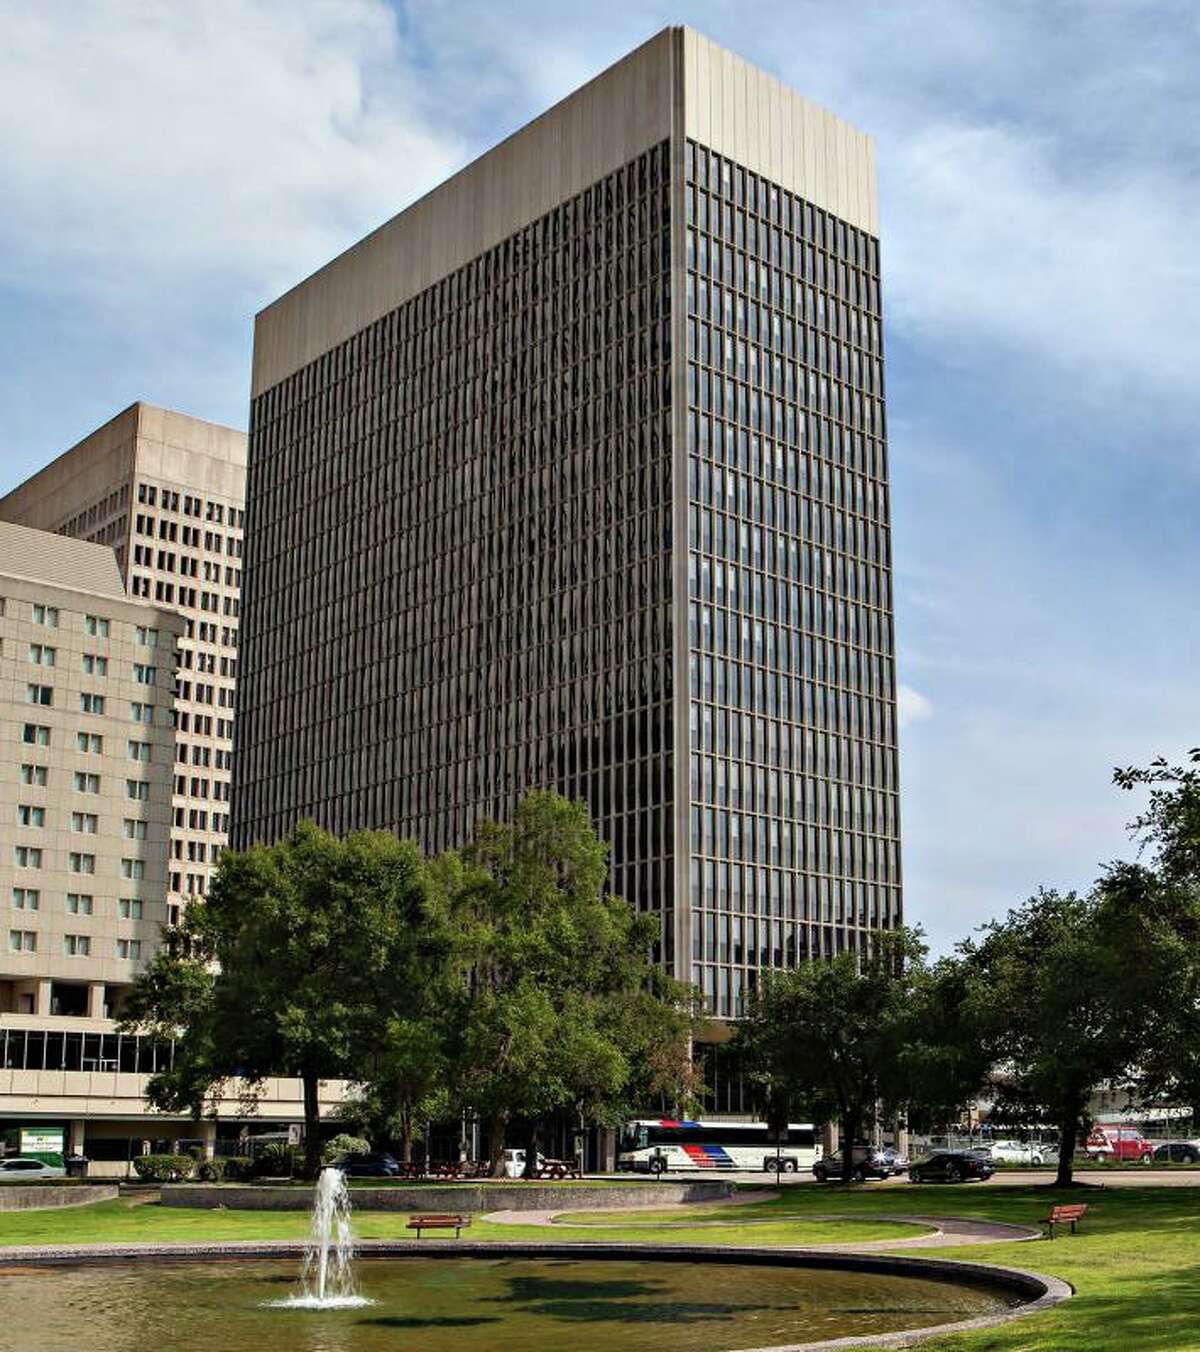 An affiliate of W.P. Carey acquired the 20-story building at 500 Jefferson through its CPA:17-Global real estate investment trust from Brookfield Office Properties.